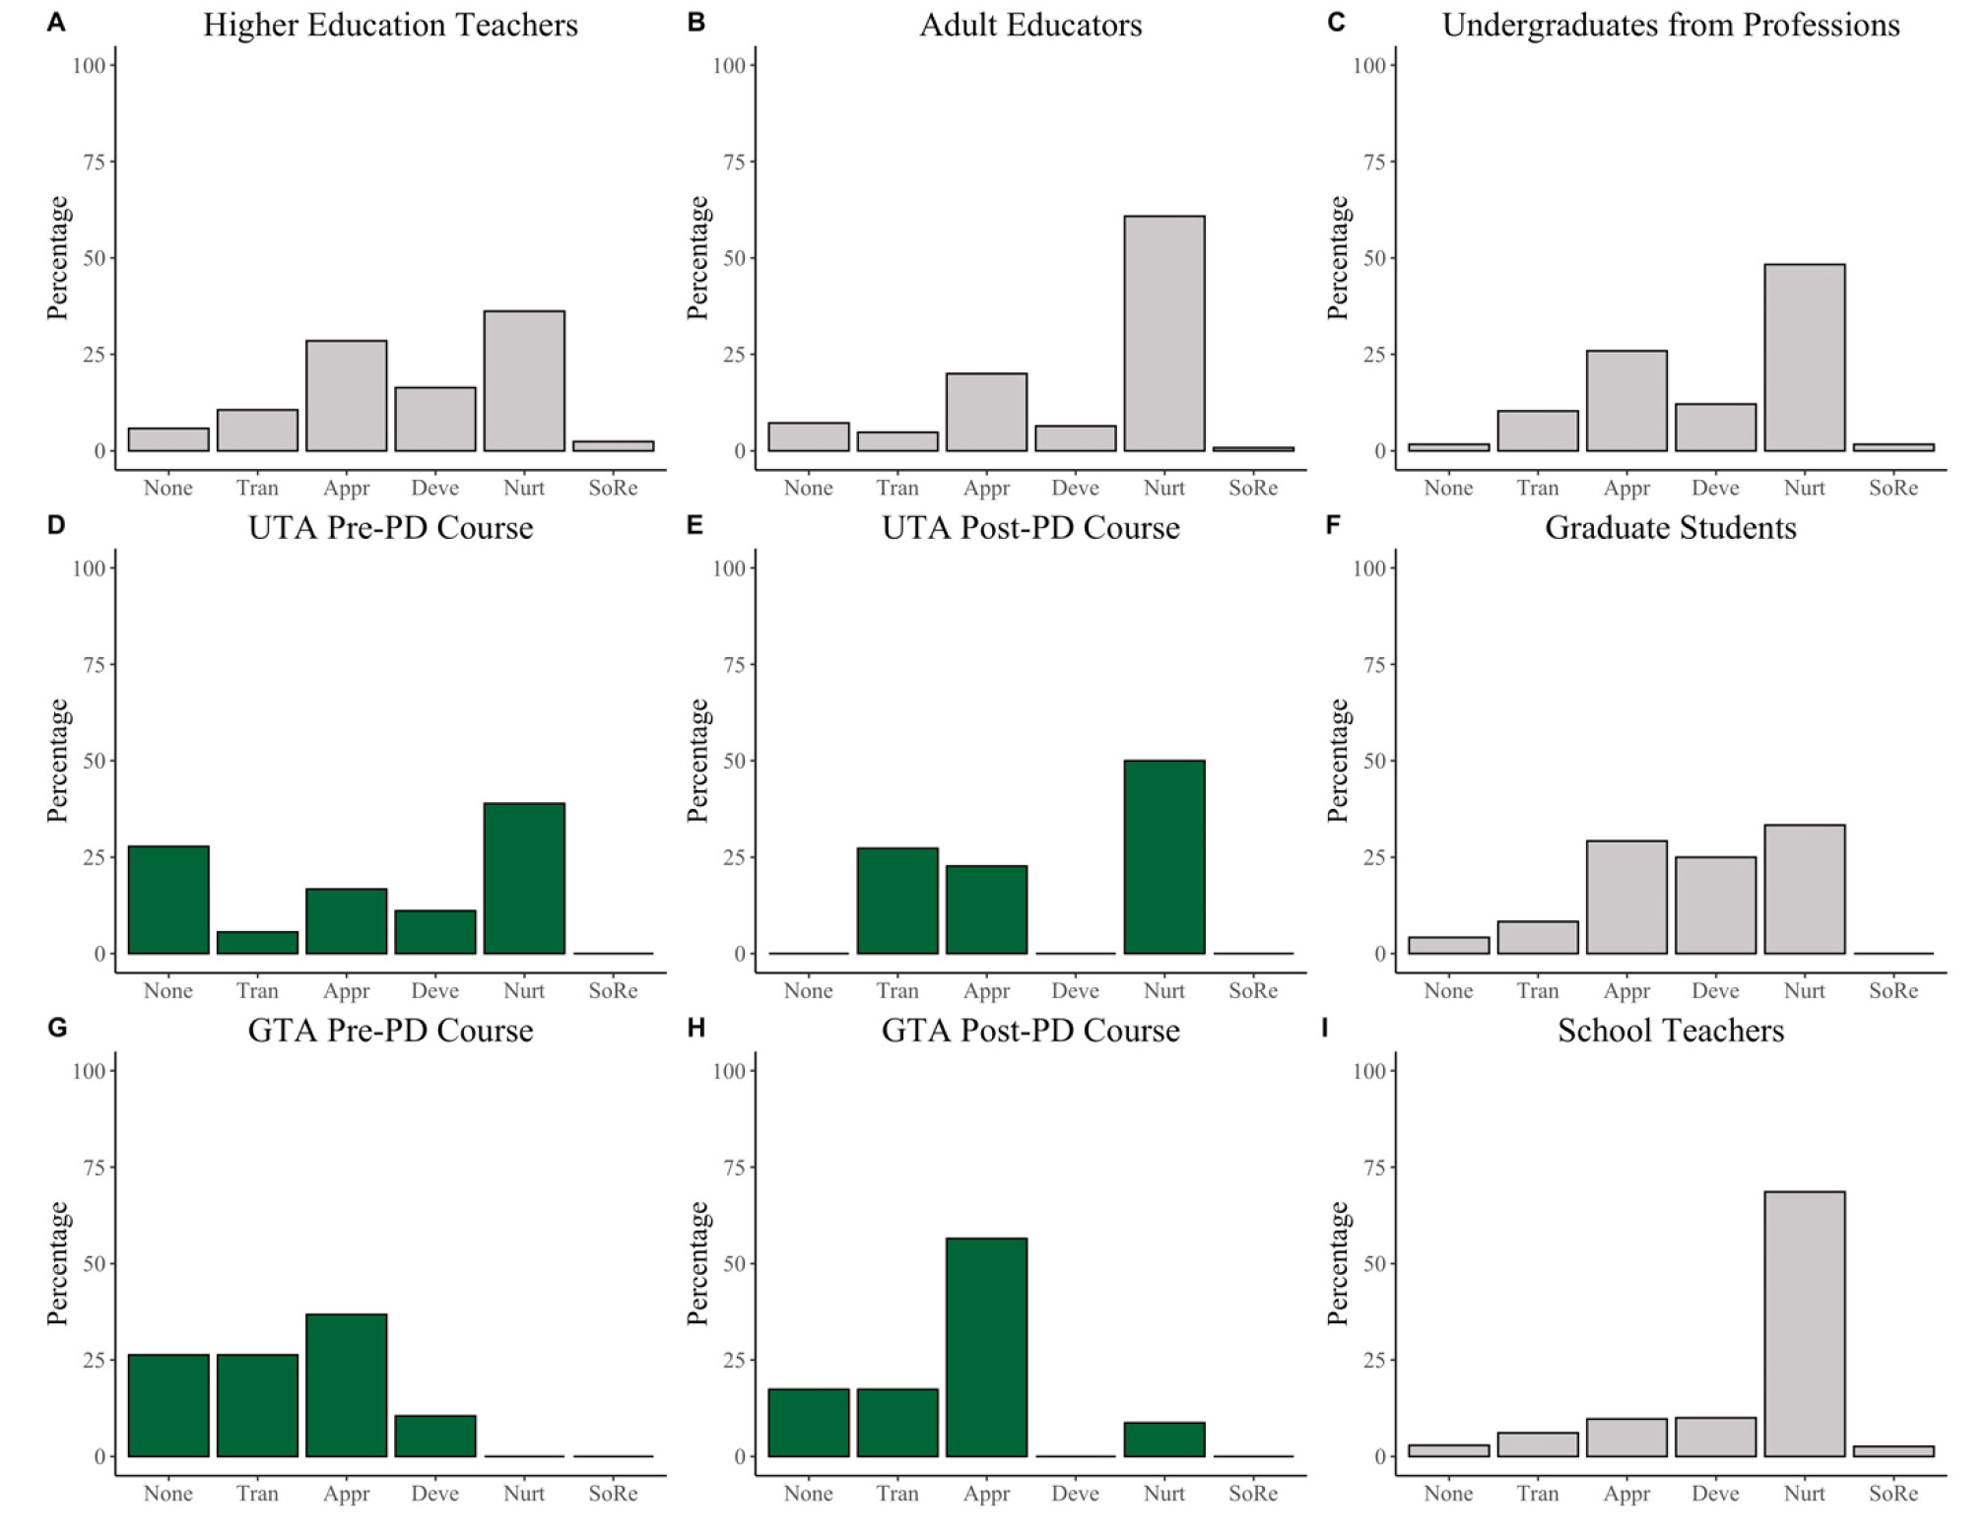 Figure 1 Dominant teaching perspectives by occupational category.